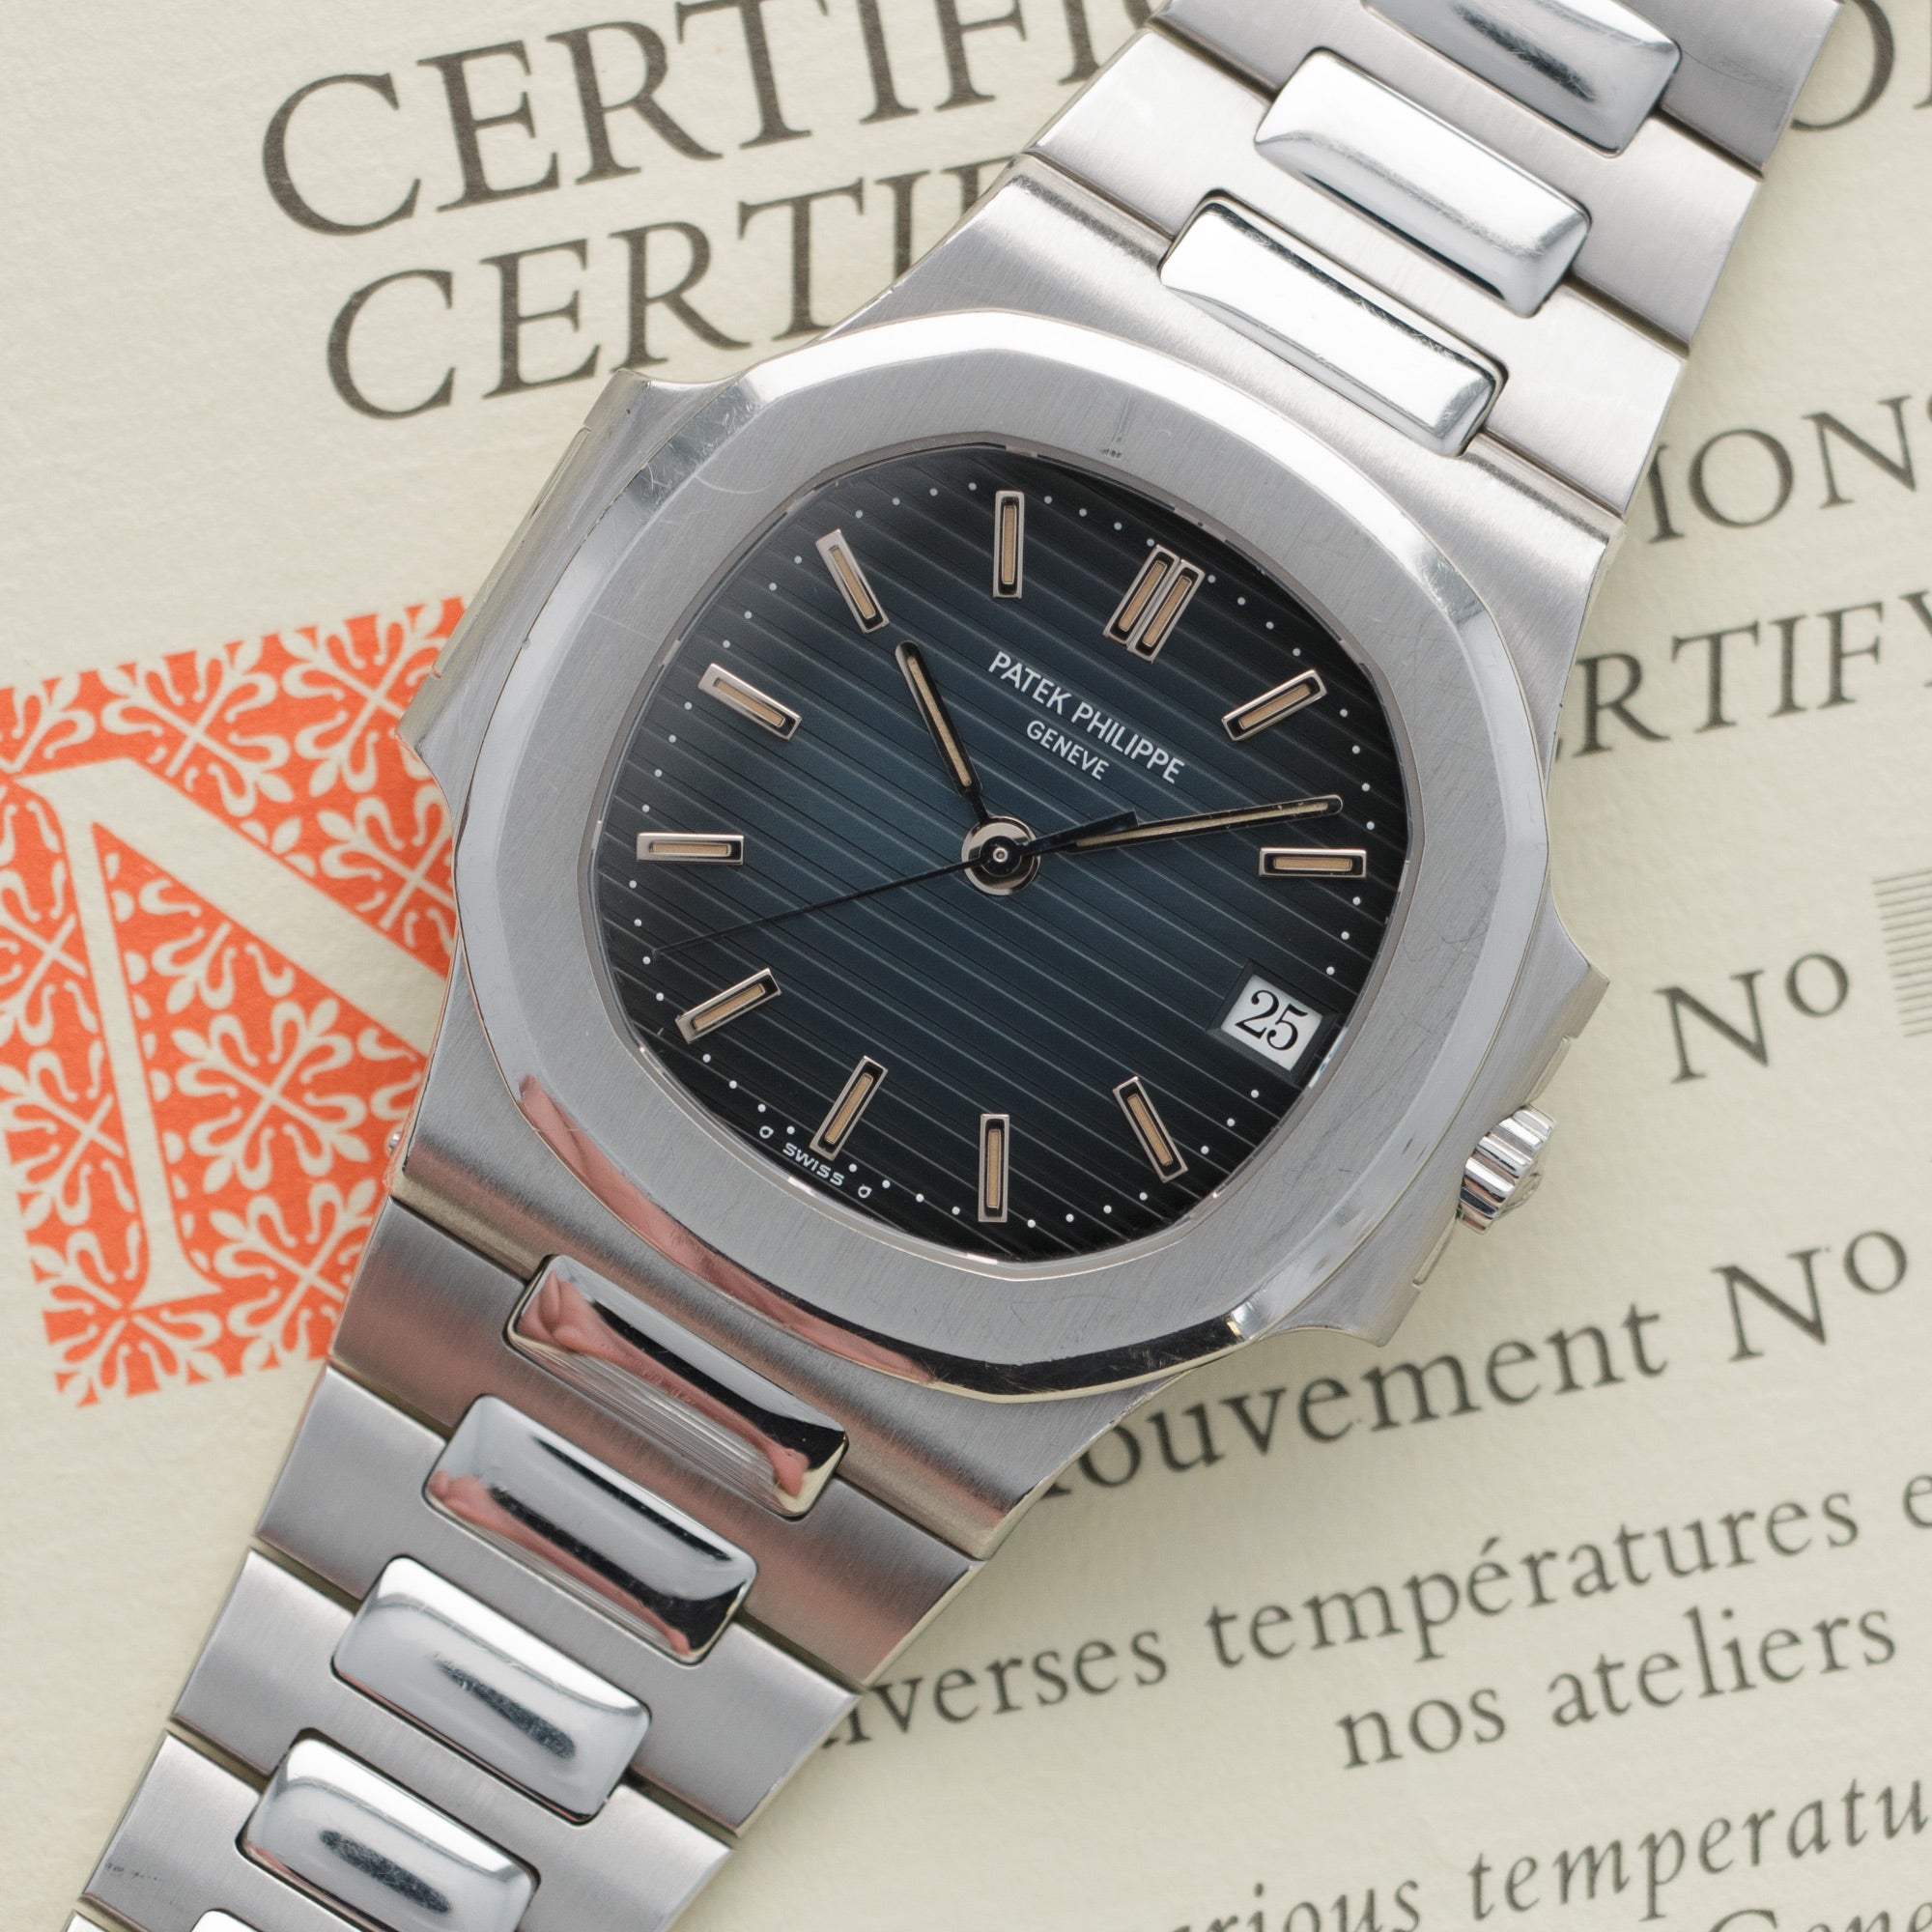 Patek Philippe - Patek Philippe Nautilus Watch Ref. 3800, with Original Box and Papers - The Keystone Watches